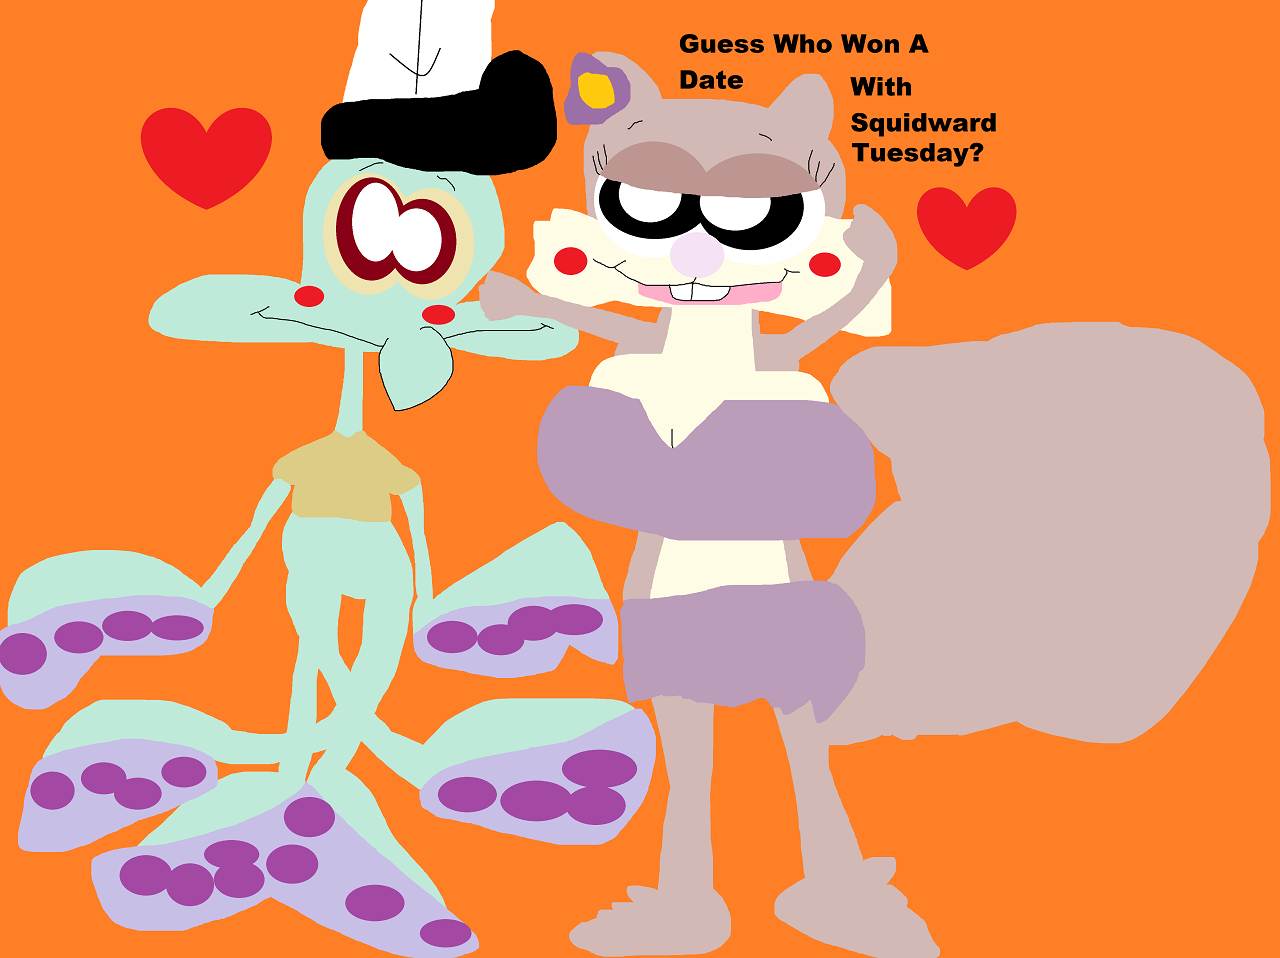 Guess Who Won A Date With Squidward Tuesday by Falconlobo